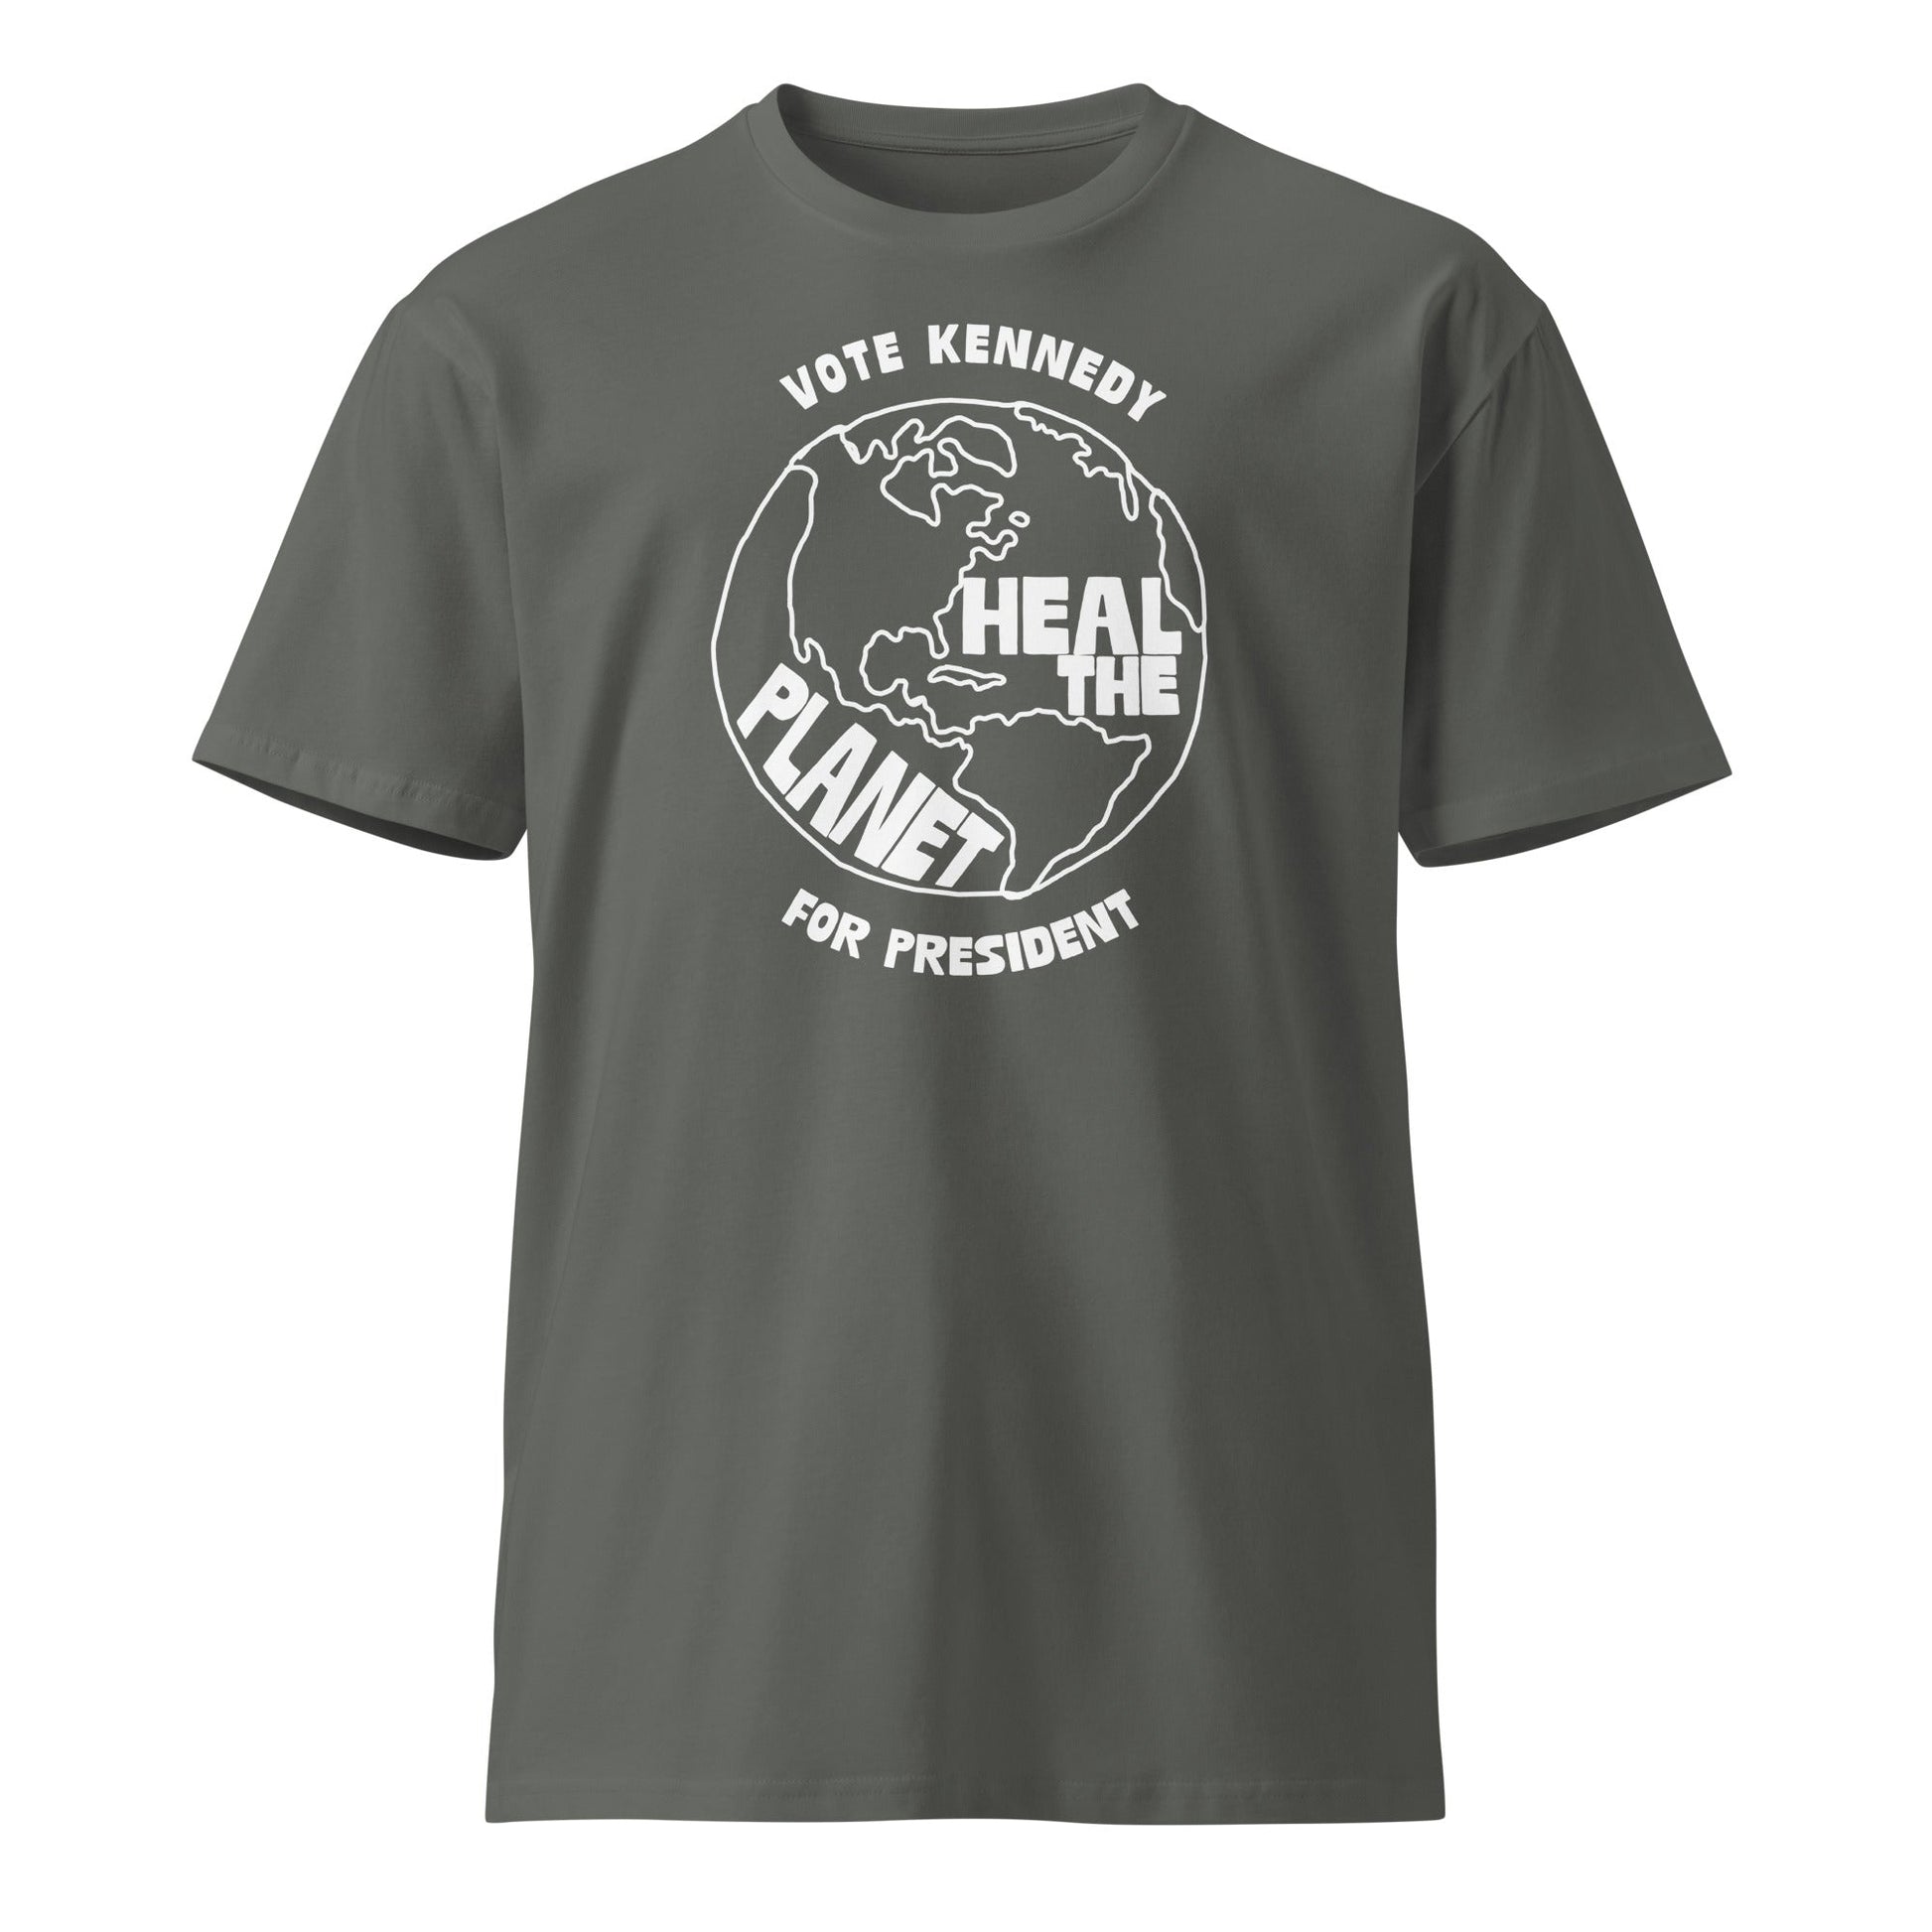 Heal the Planet Unisex Premium Tee - TEAM KENNEDY. All rights reserved